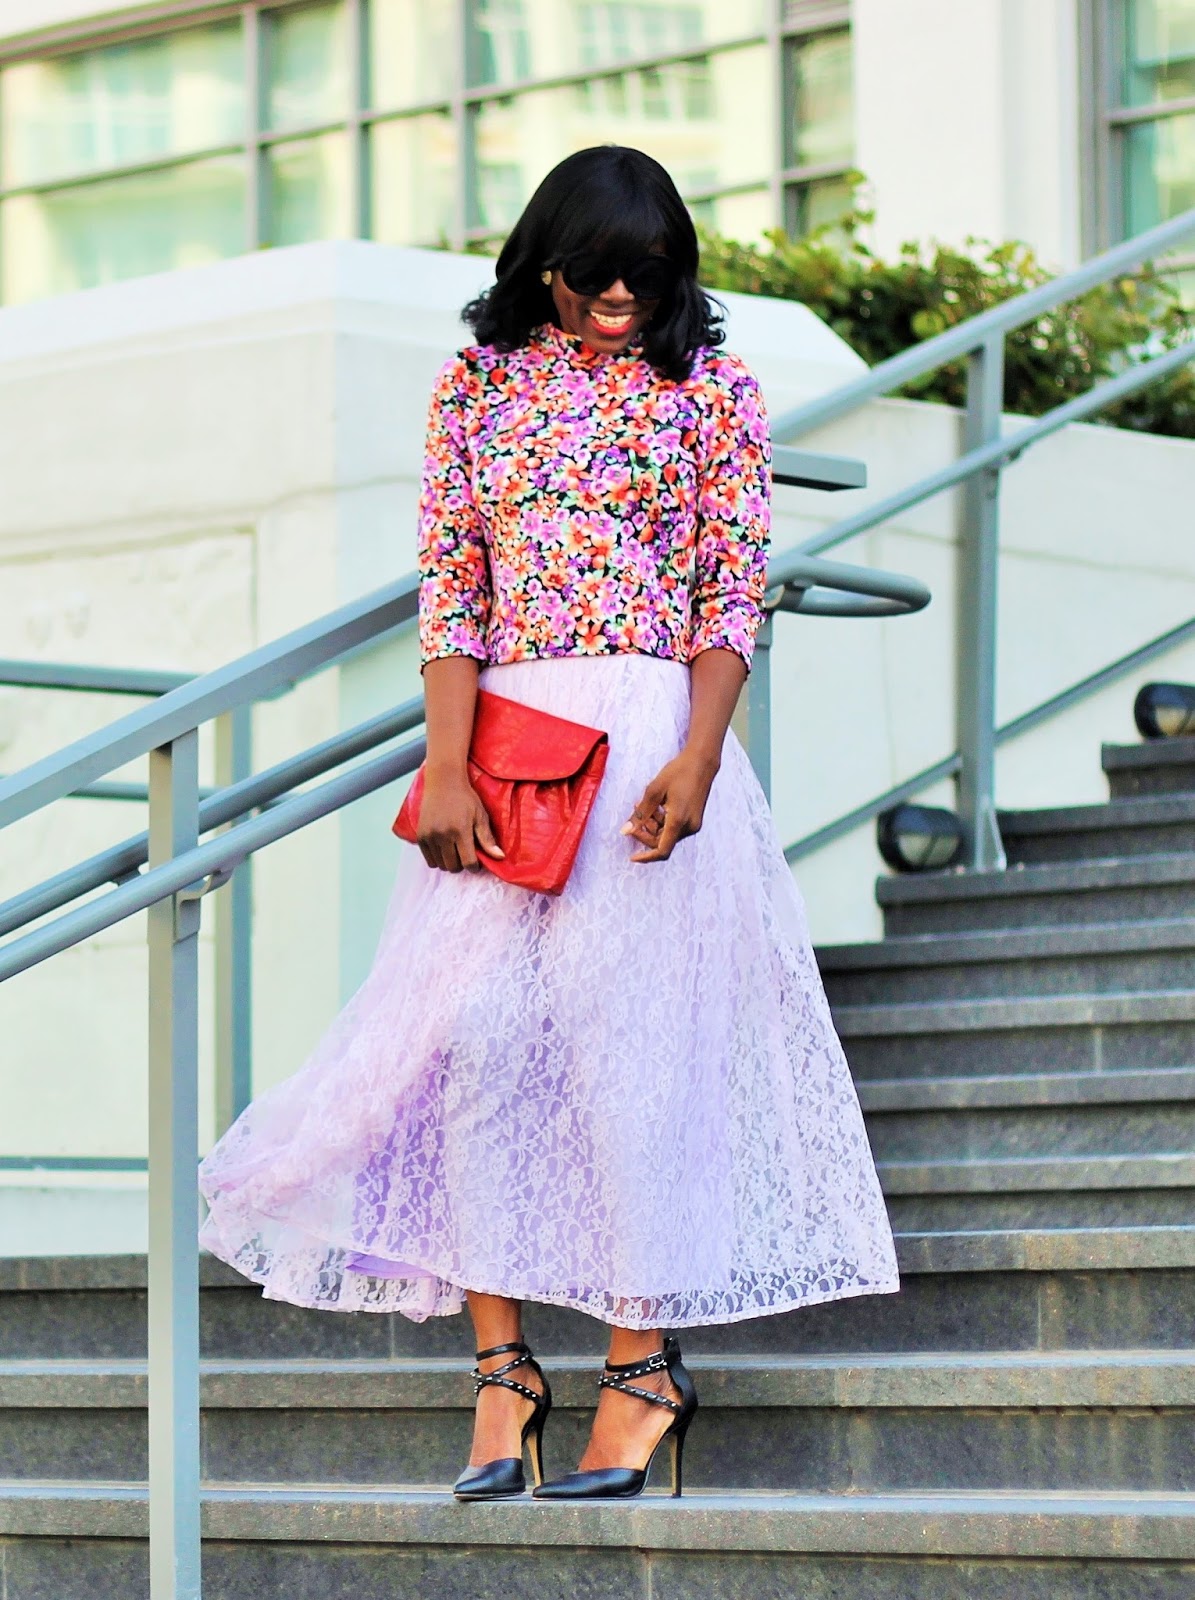 TORONTO FASHION WEEK ROOKIE STYLE: Lace midi skirt and  flroral print top